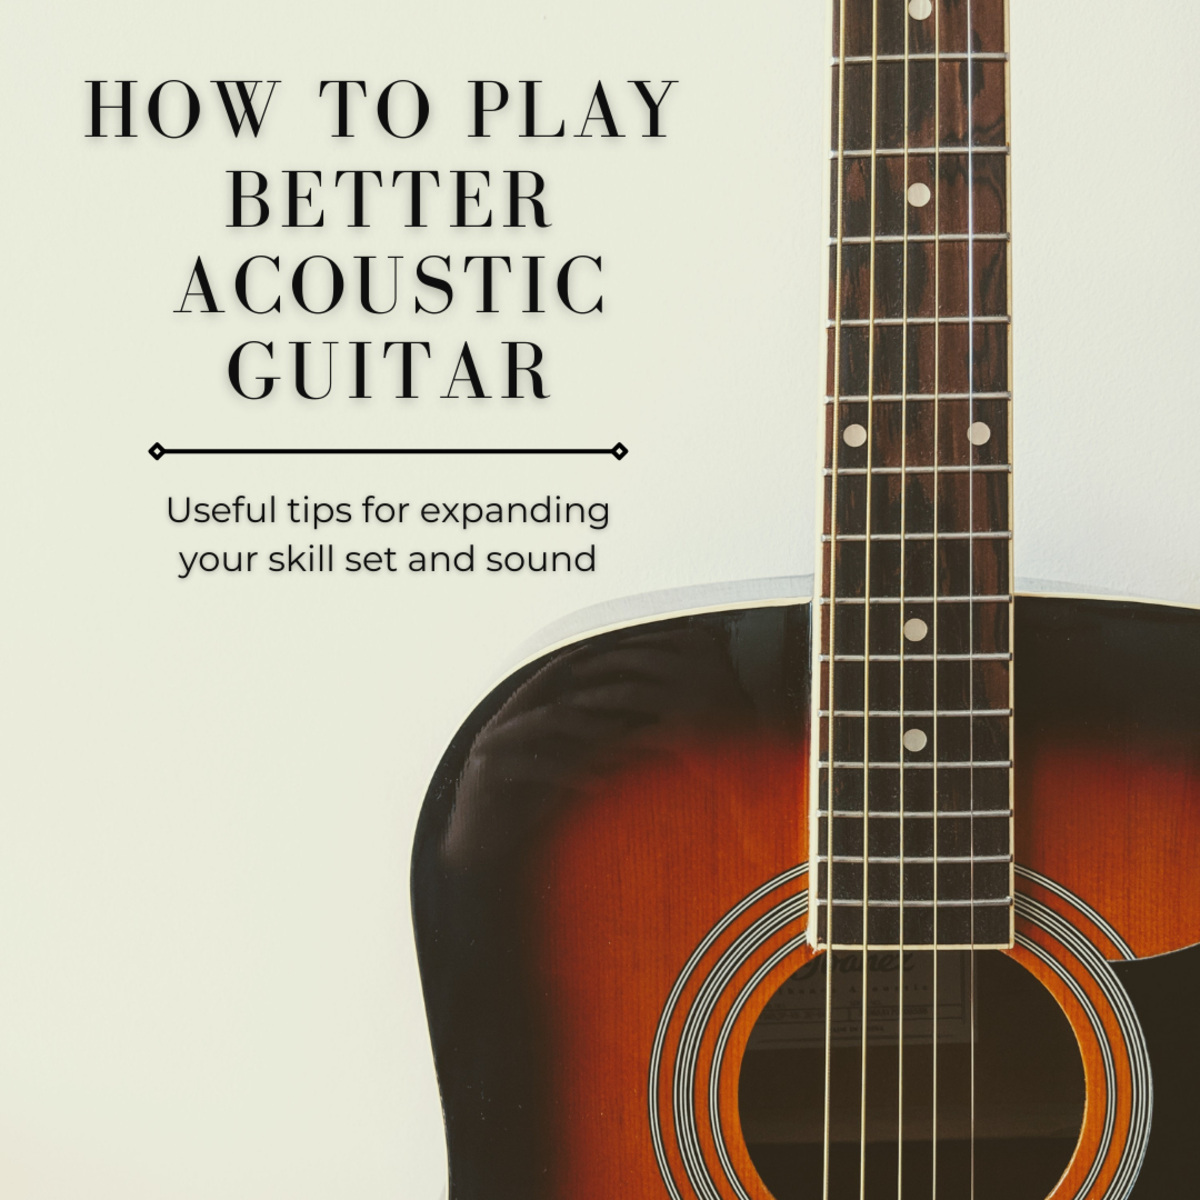 This article will offer some useful tips for how to build out your skill set with the acoustic guitar and expand your sound.